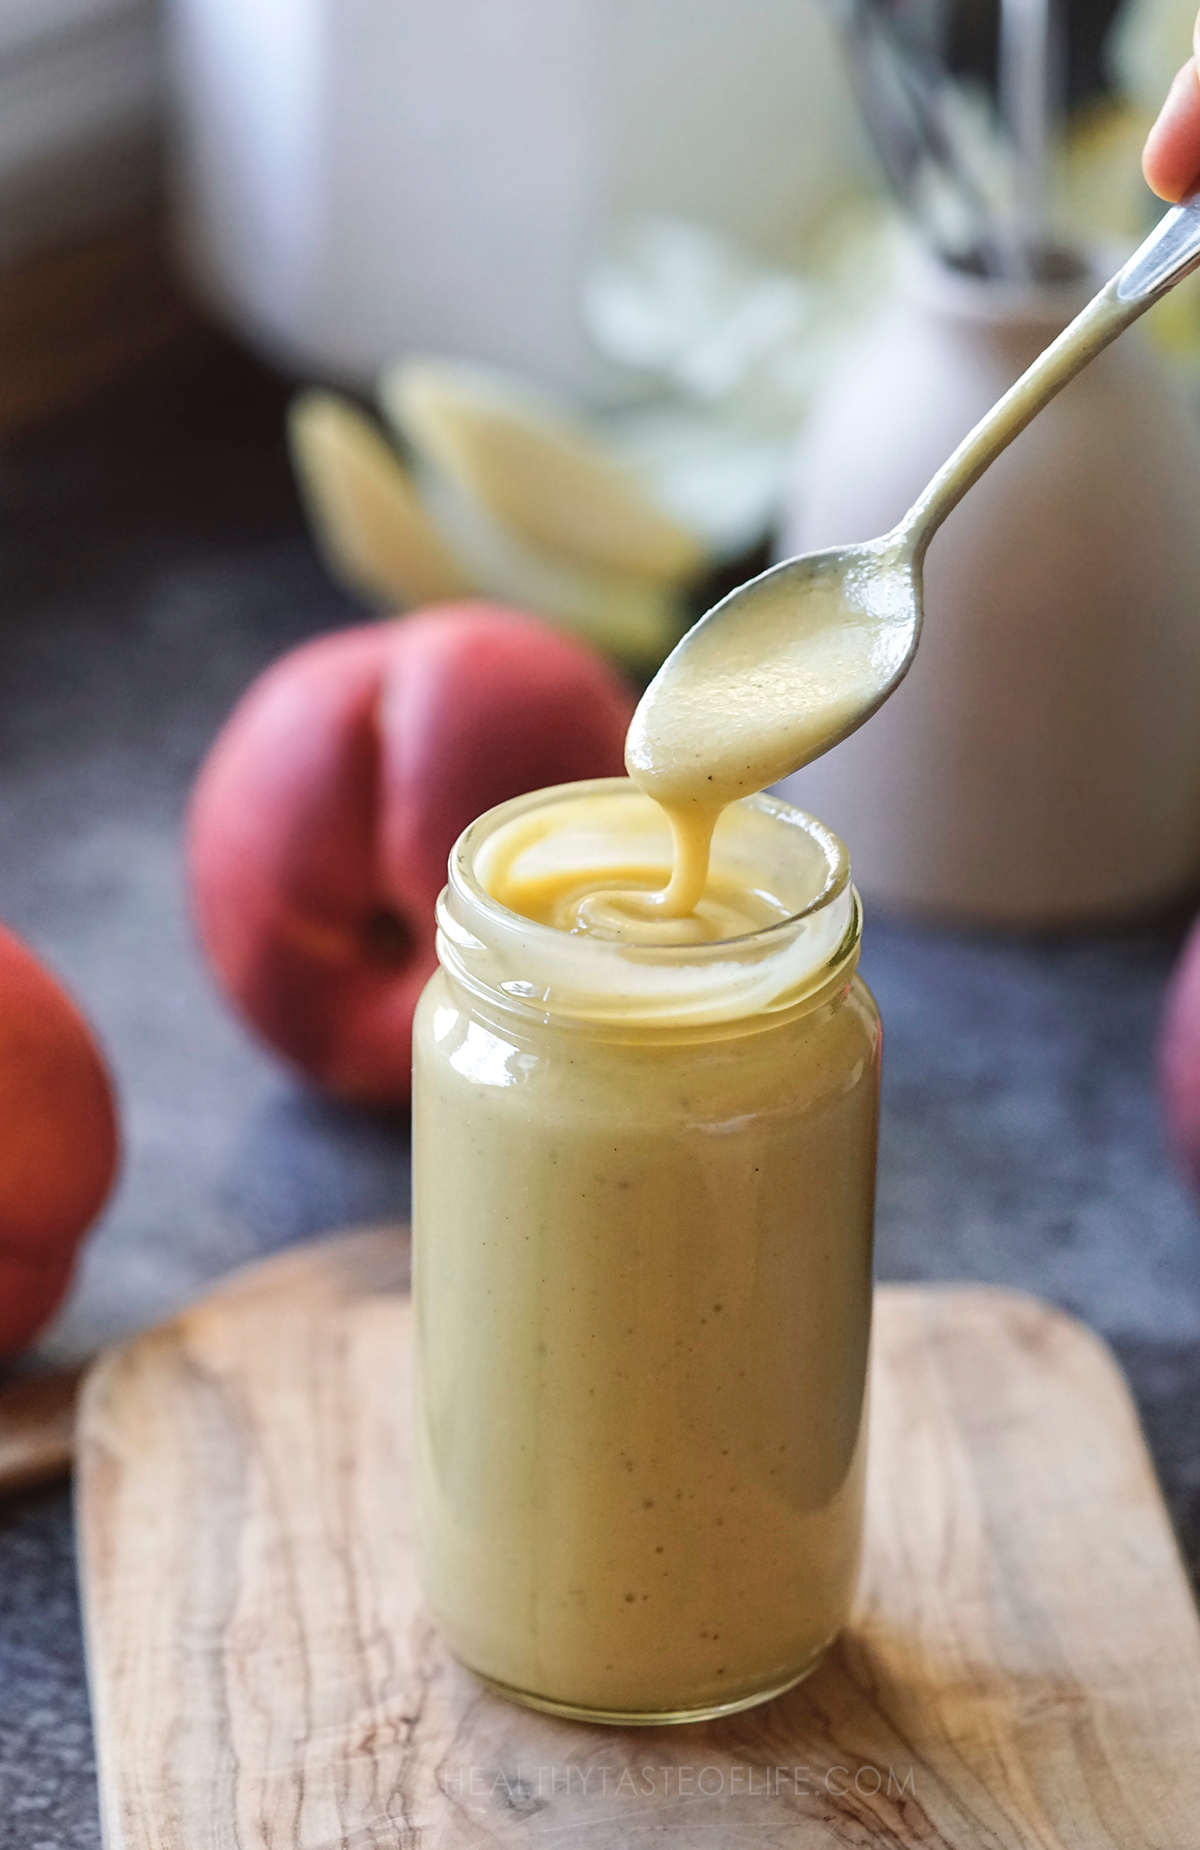 Peach salad dressing, creamy and smooth made with peach fruit, oil, vinegar and mustard.